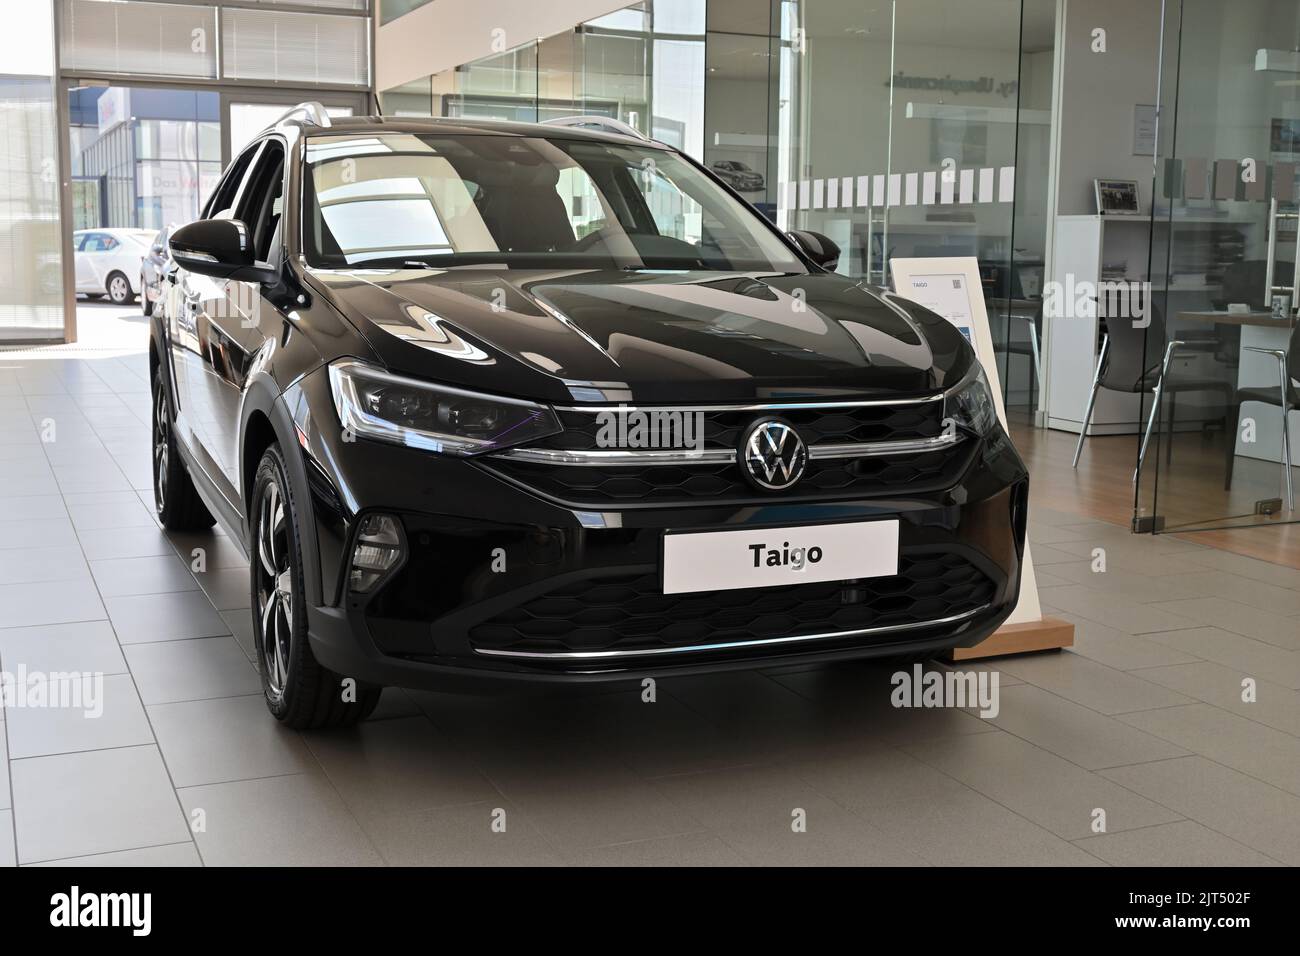 Gdansk, Poland - August 27, 2022: New model of Volkswagen Taigo presented in the car showroom of Gdansk Stock Photo